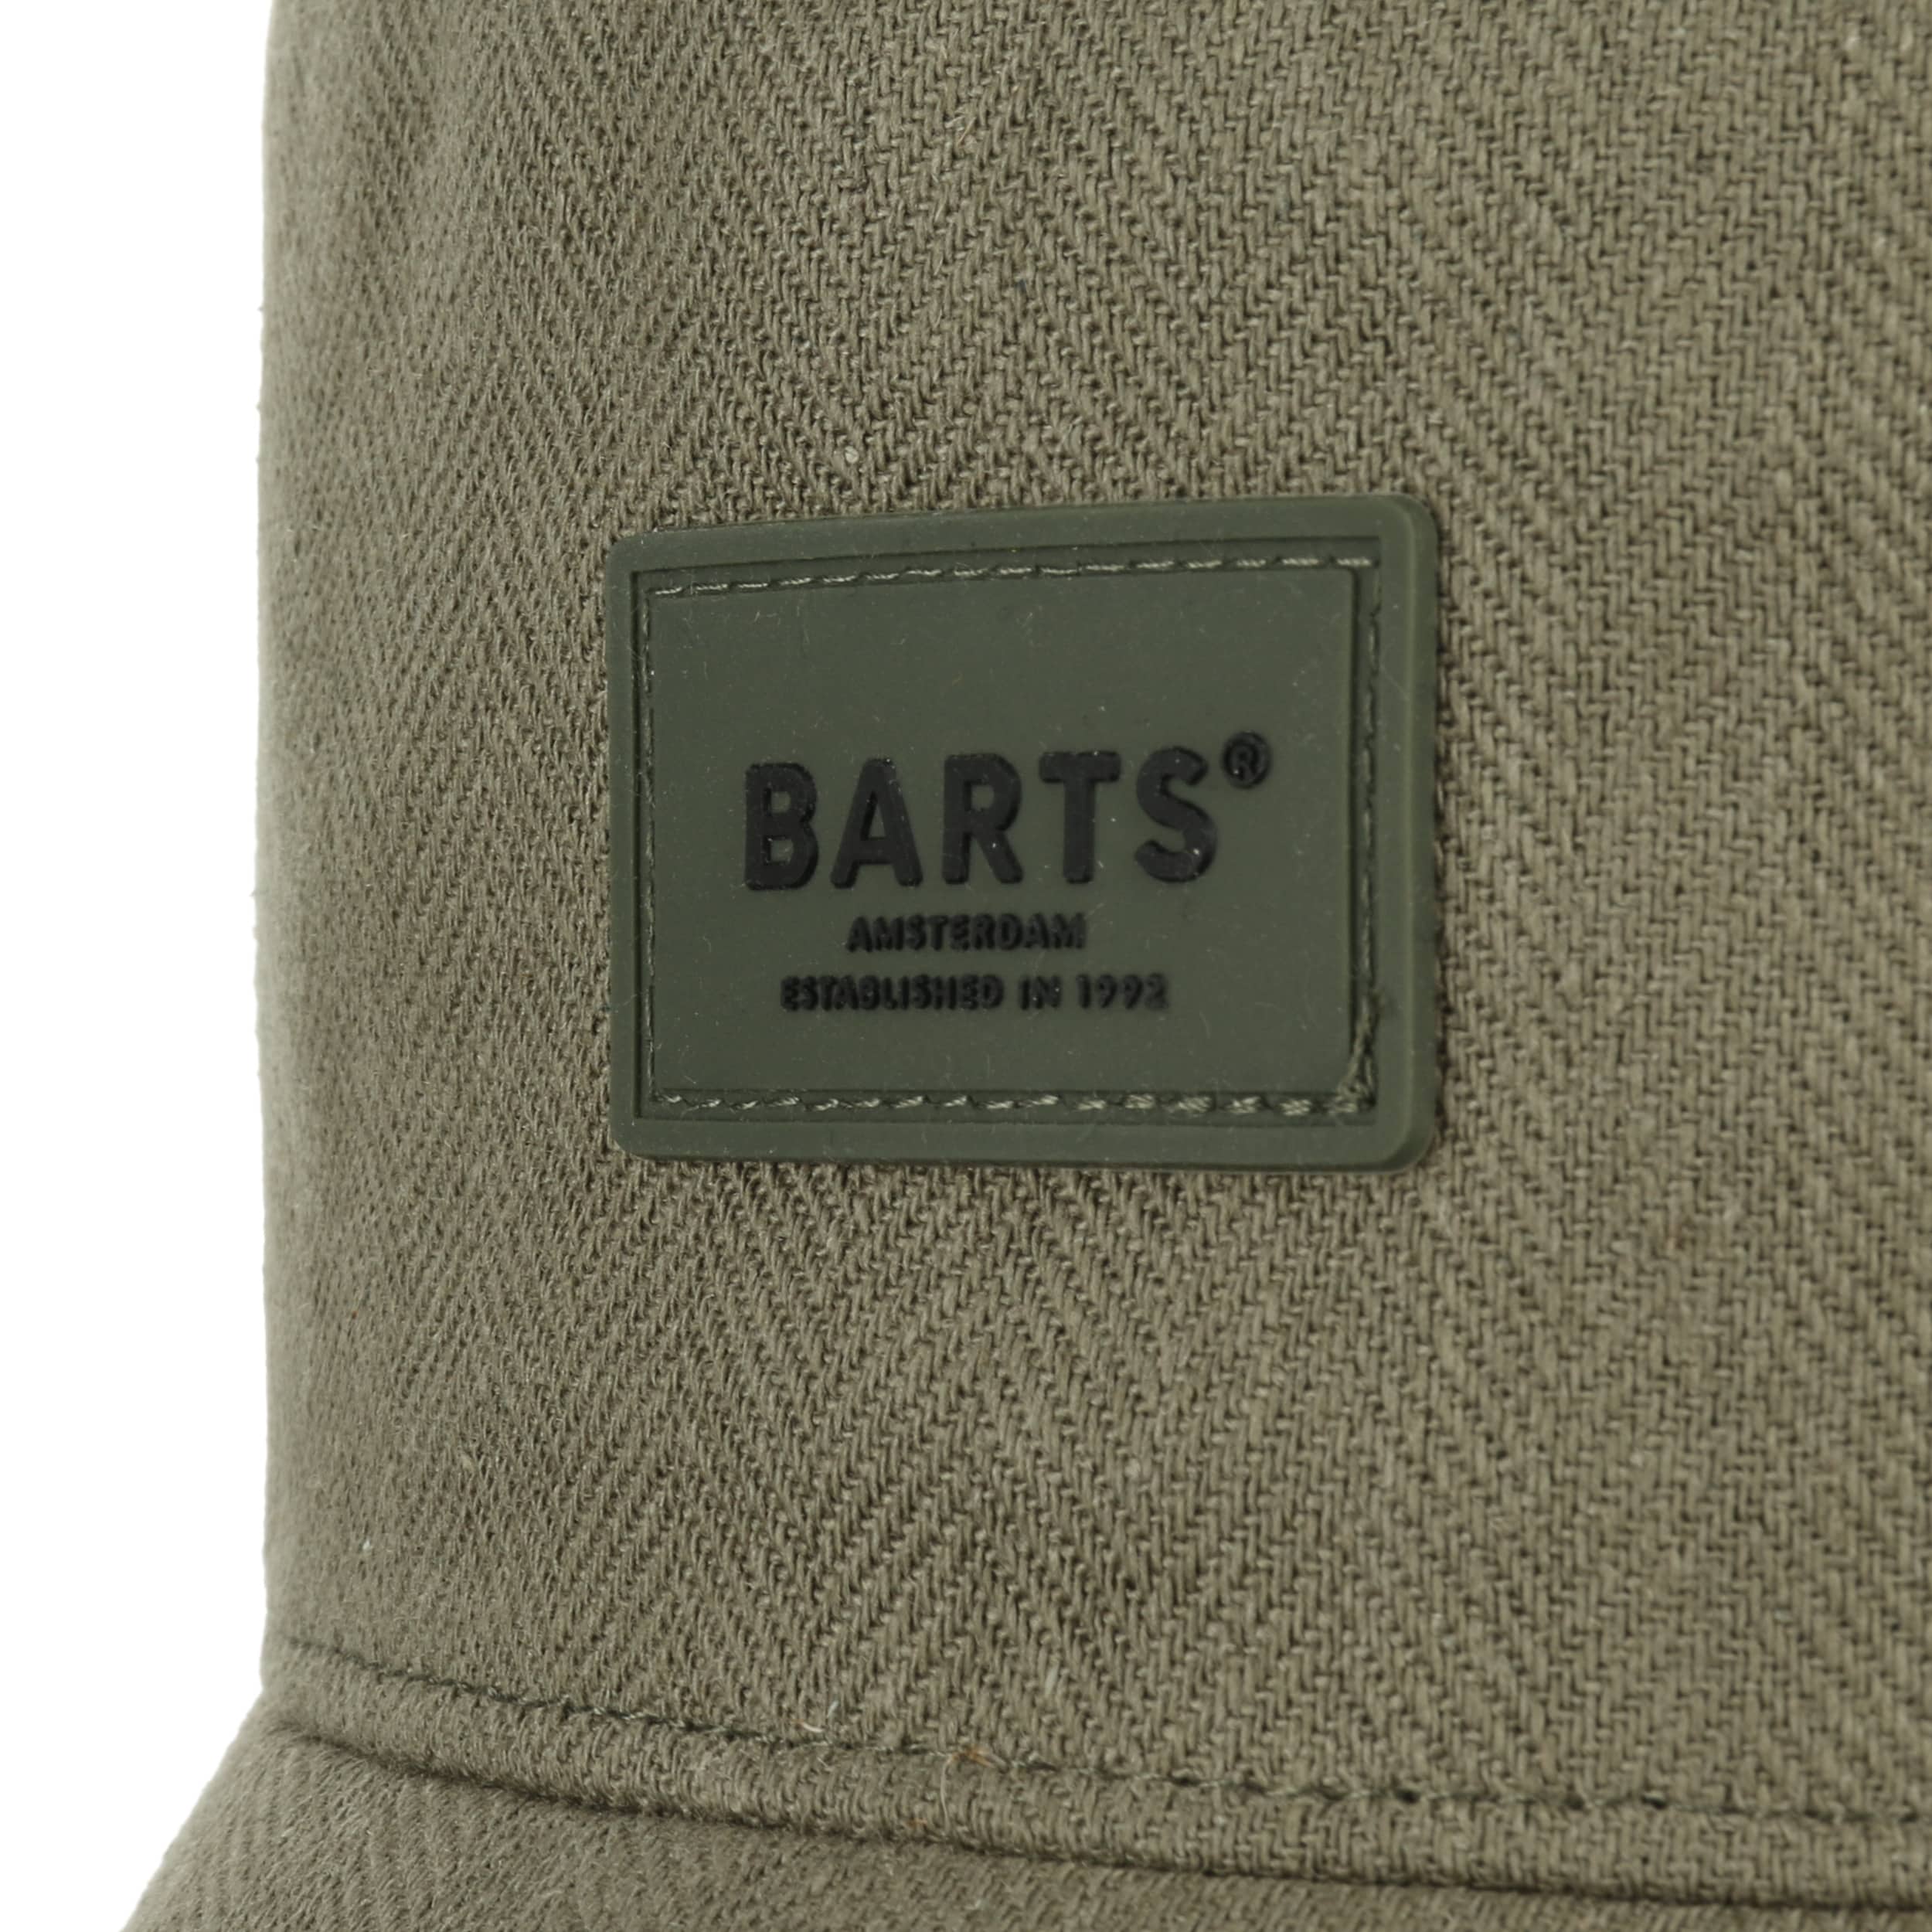 Montania Army Cap by Barts - 389,00 kr